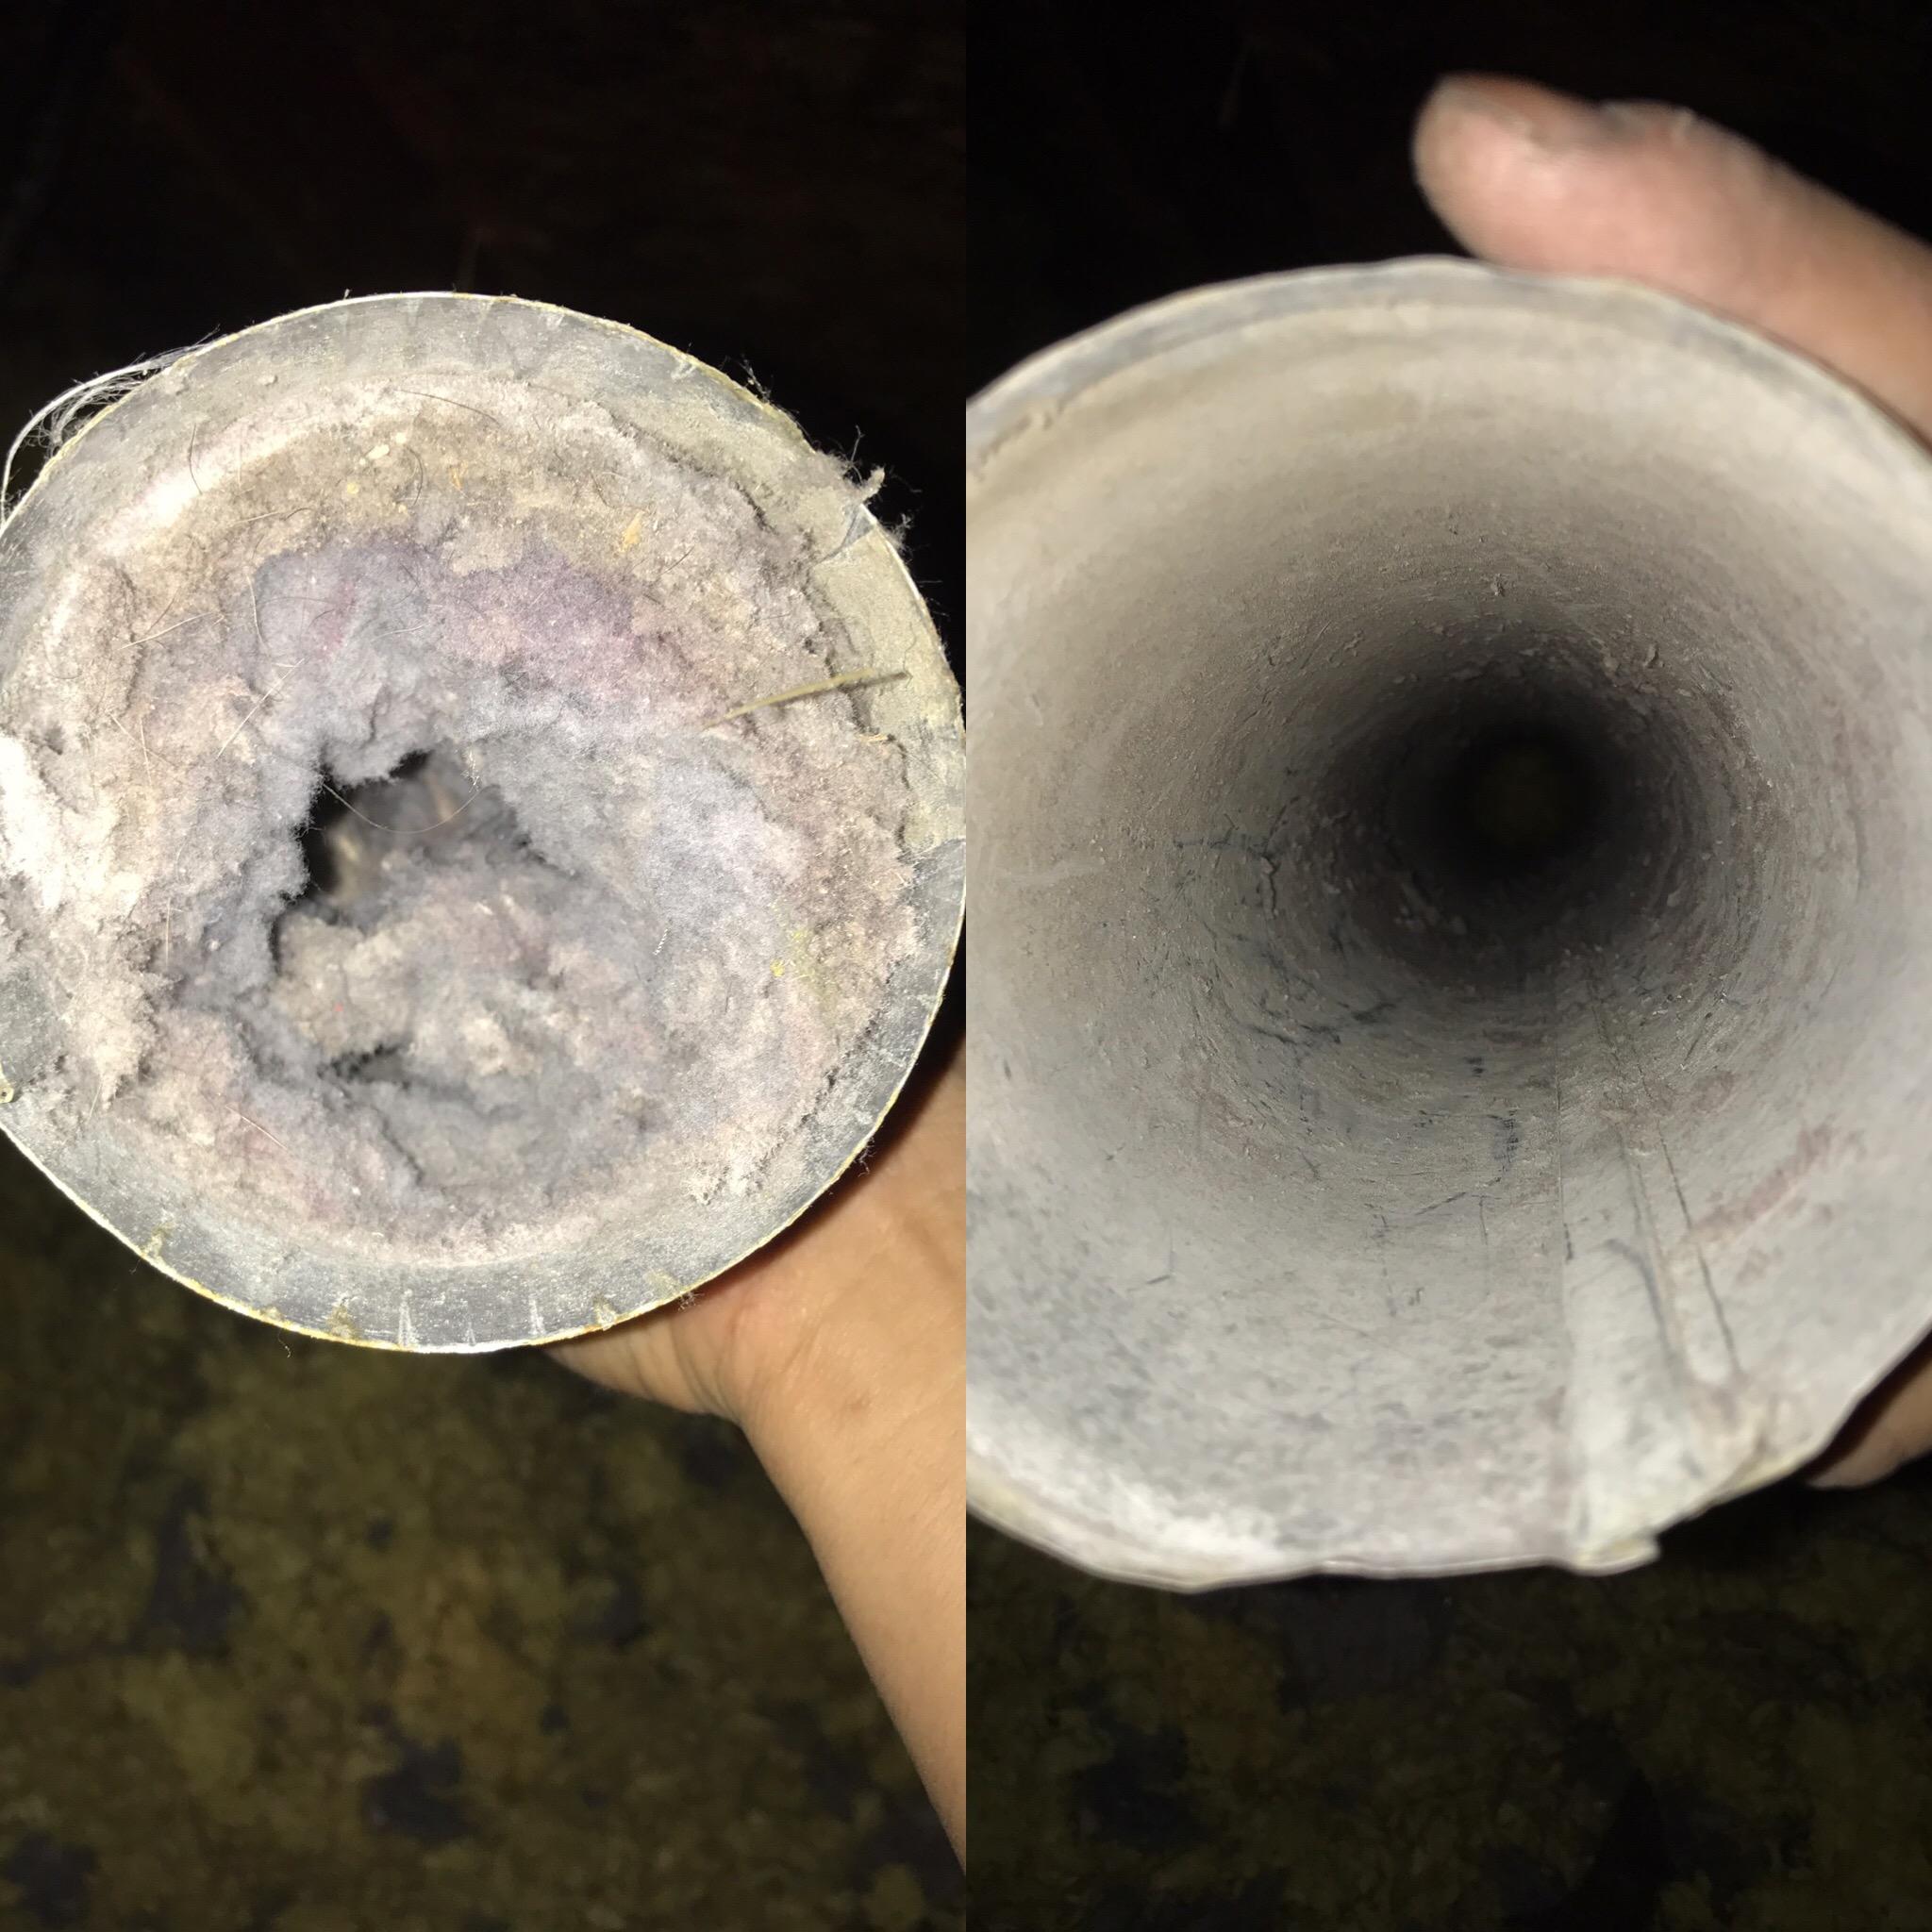 Dryer Vent Cleaning - before & after cleaning